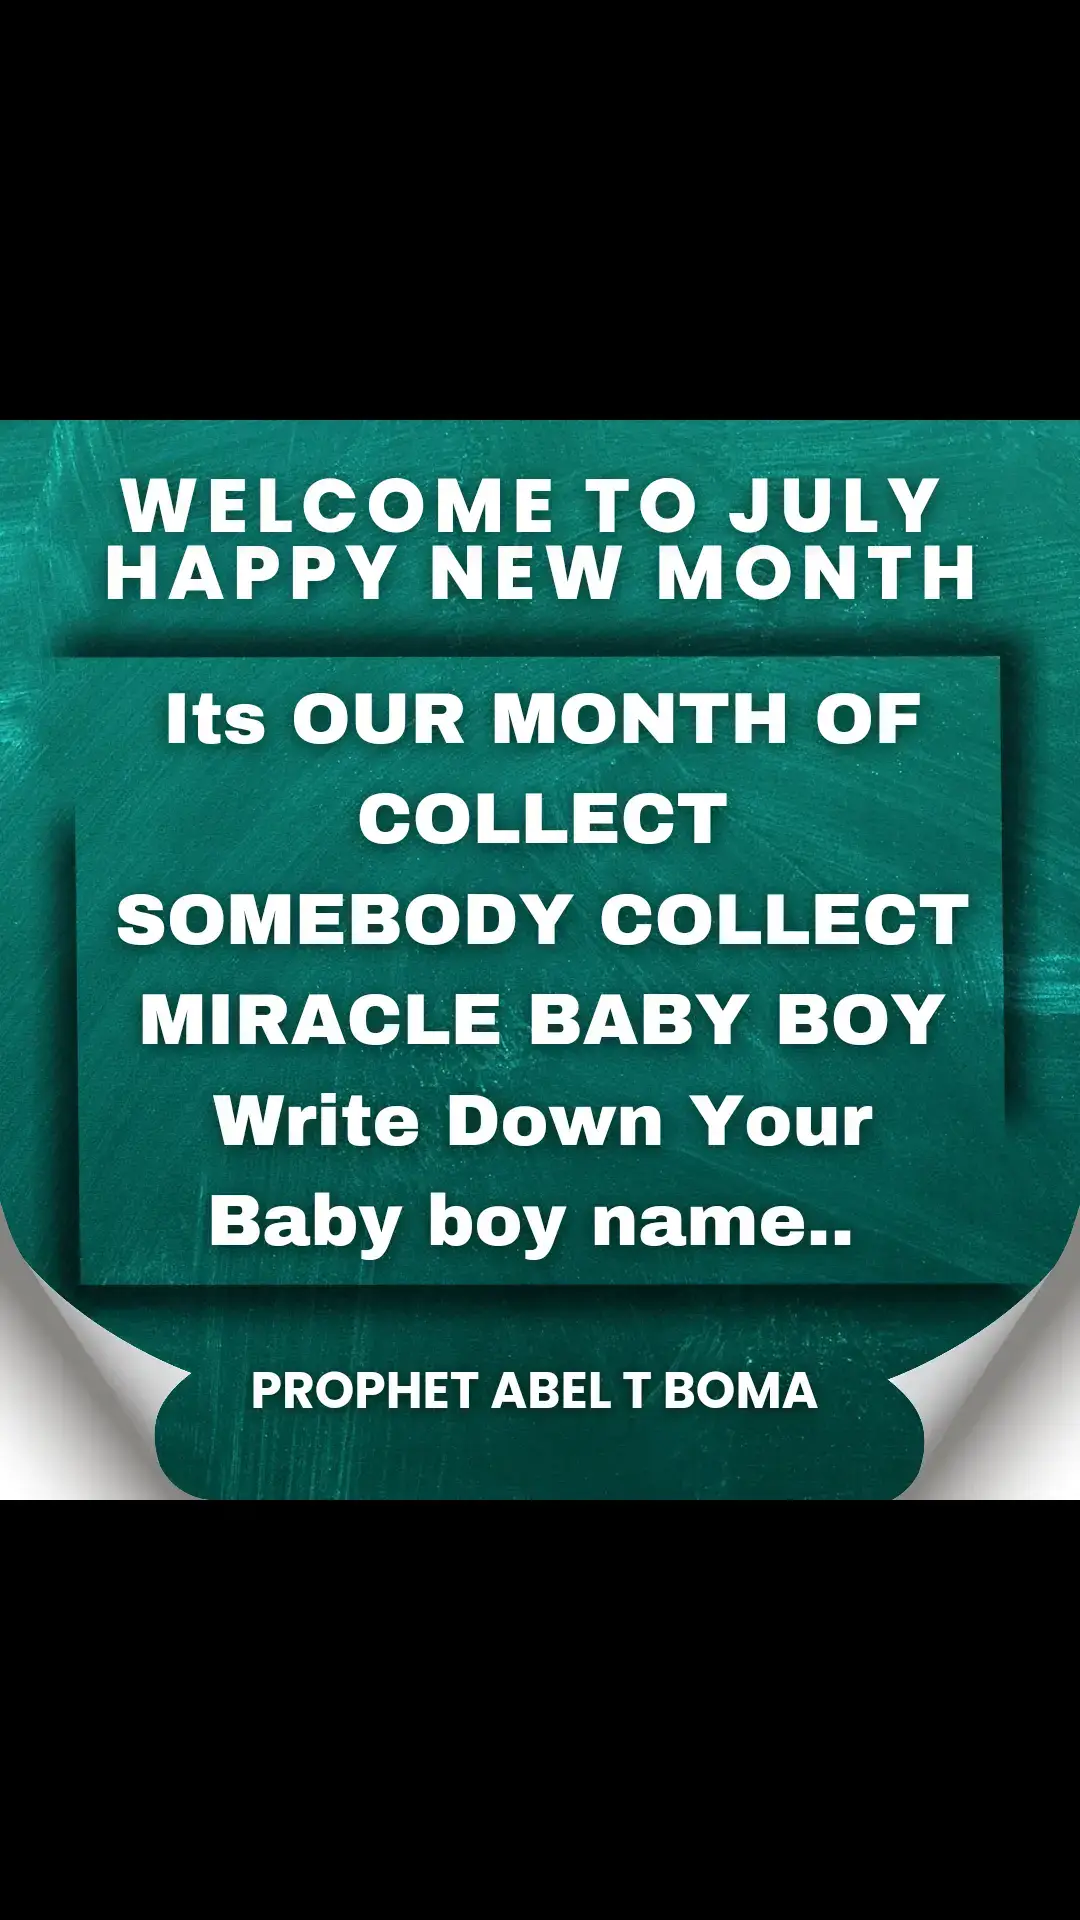 Its OUR MONTH OF COLLECT SOMEBODY COLLECT MIRACLE BABY BOY Write Down Your Baby boy name..